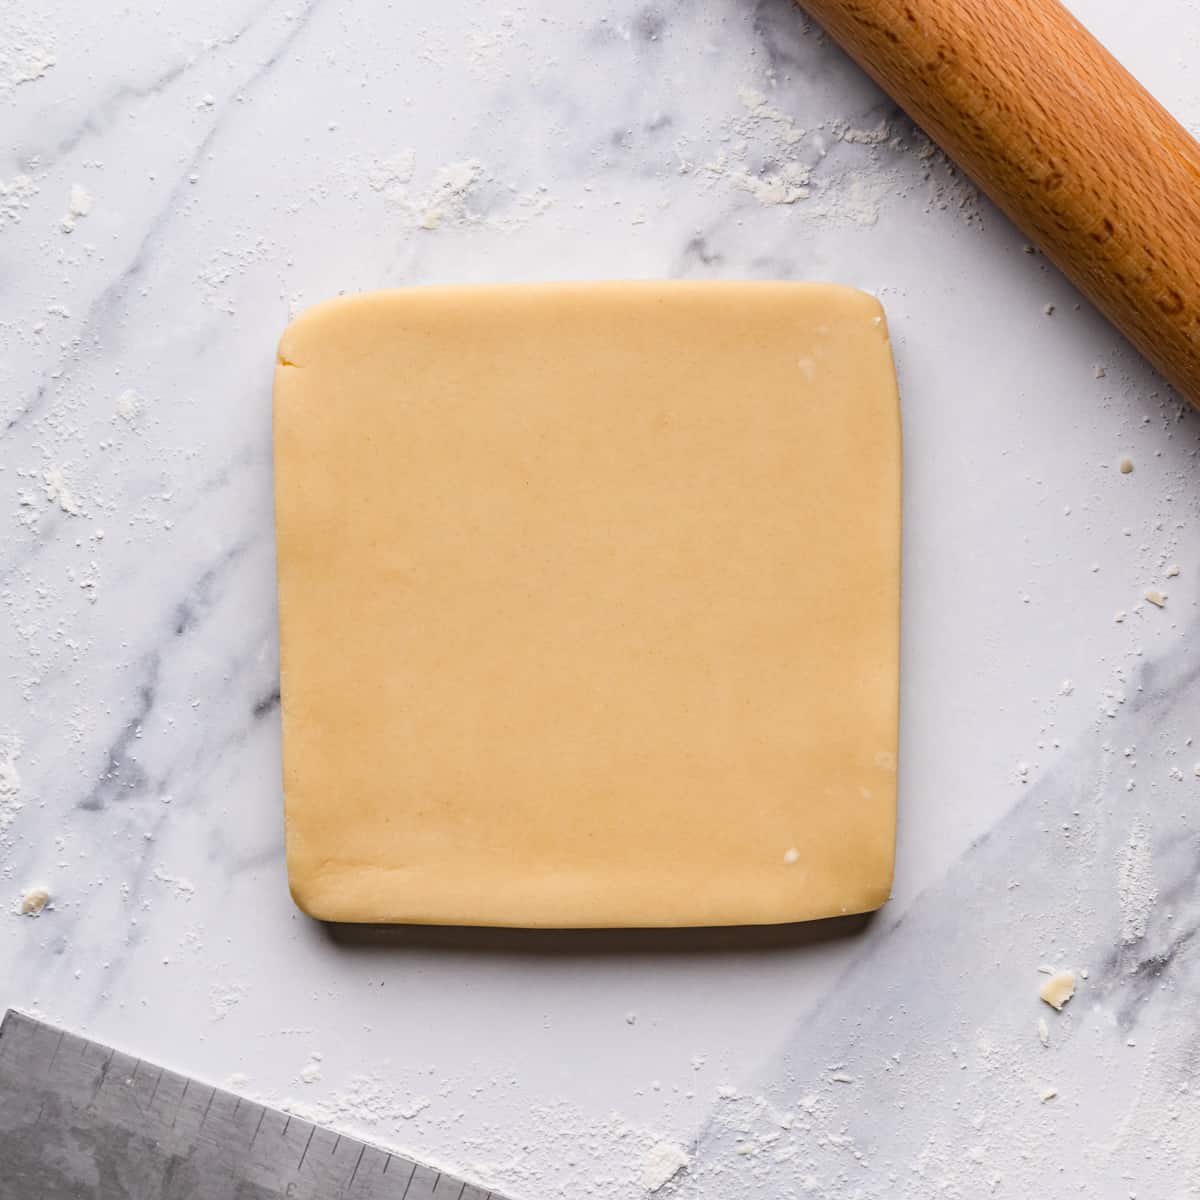 biscuits dough rolled into square on a lightly floured surface.